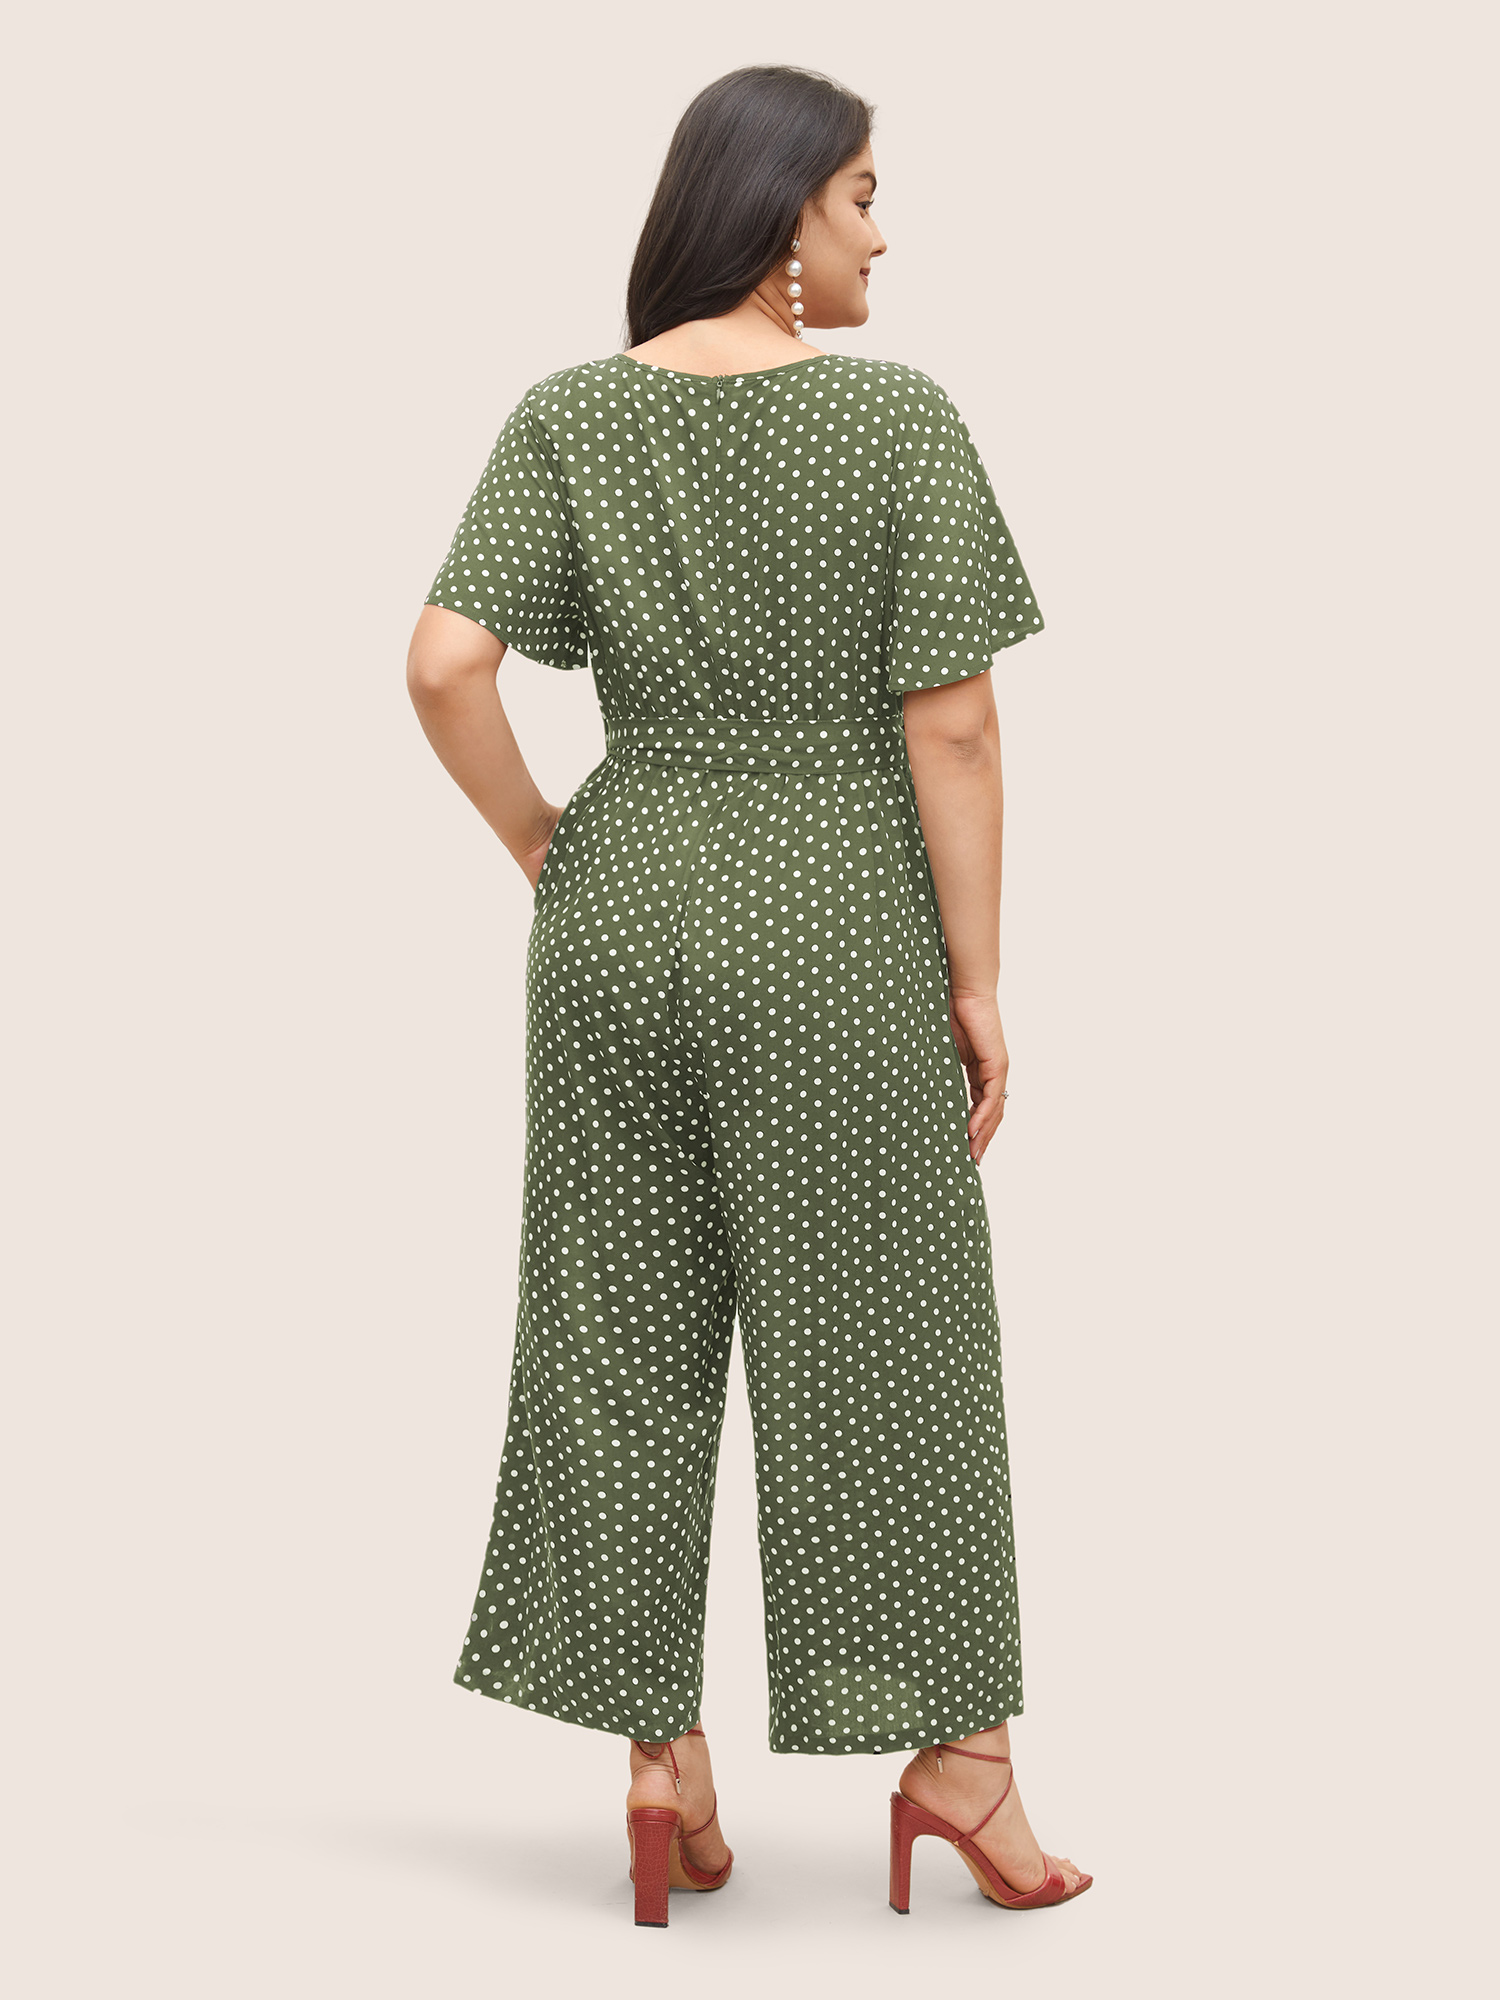 

Plus Size Sage Polka Dot Cut Out Zipper Belted Jumpsuit Women Elegant Short sleeve Notched collar Everyday Loose Jumpsuits BloomChic